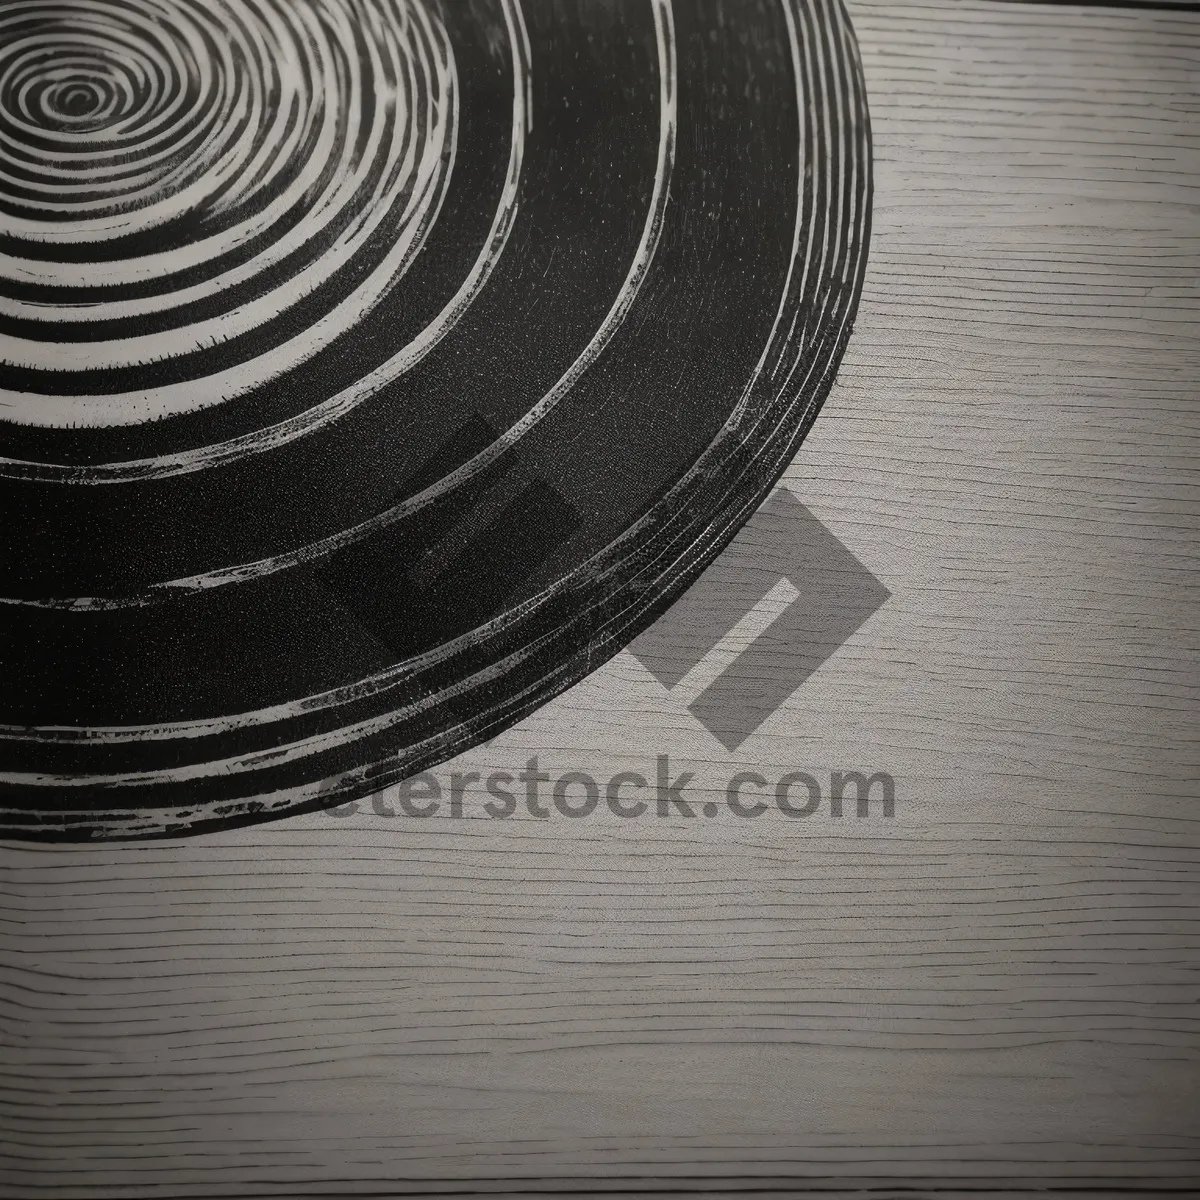 Picture of Dynamic Liquid Wave Texture Design for Digital Wallpaper